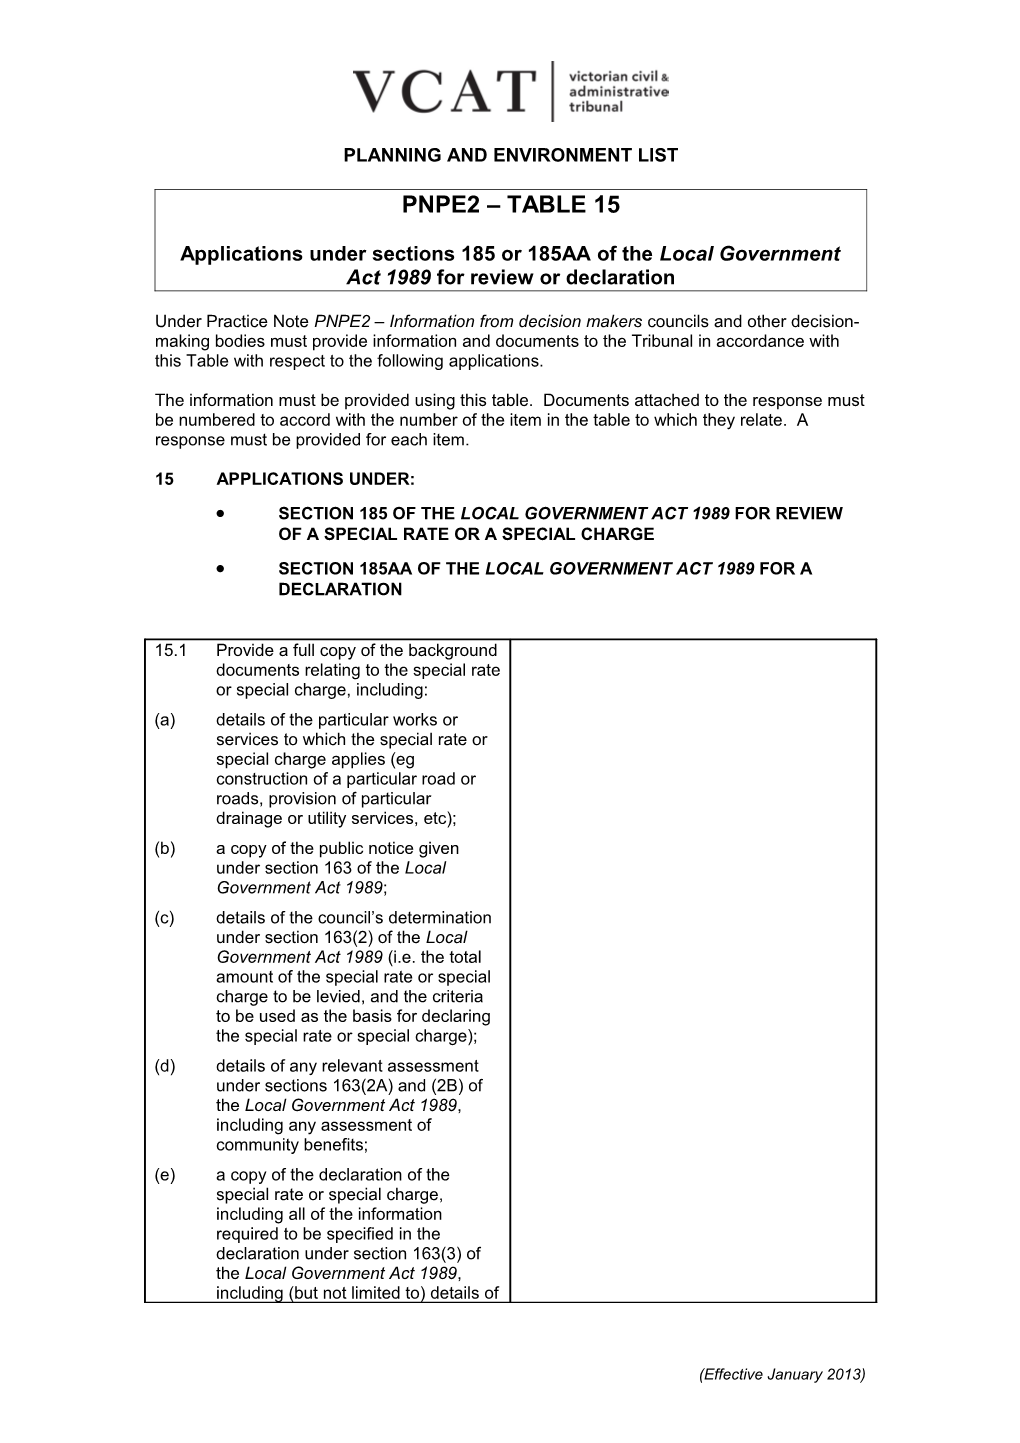 Applications Under Sections 185 Or 185AA of the Local Government Act 1989 for Review Or